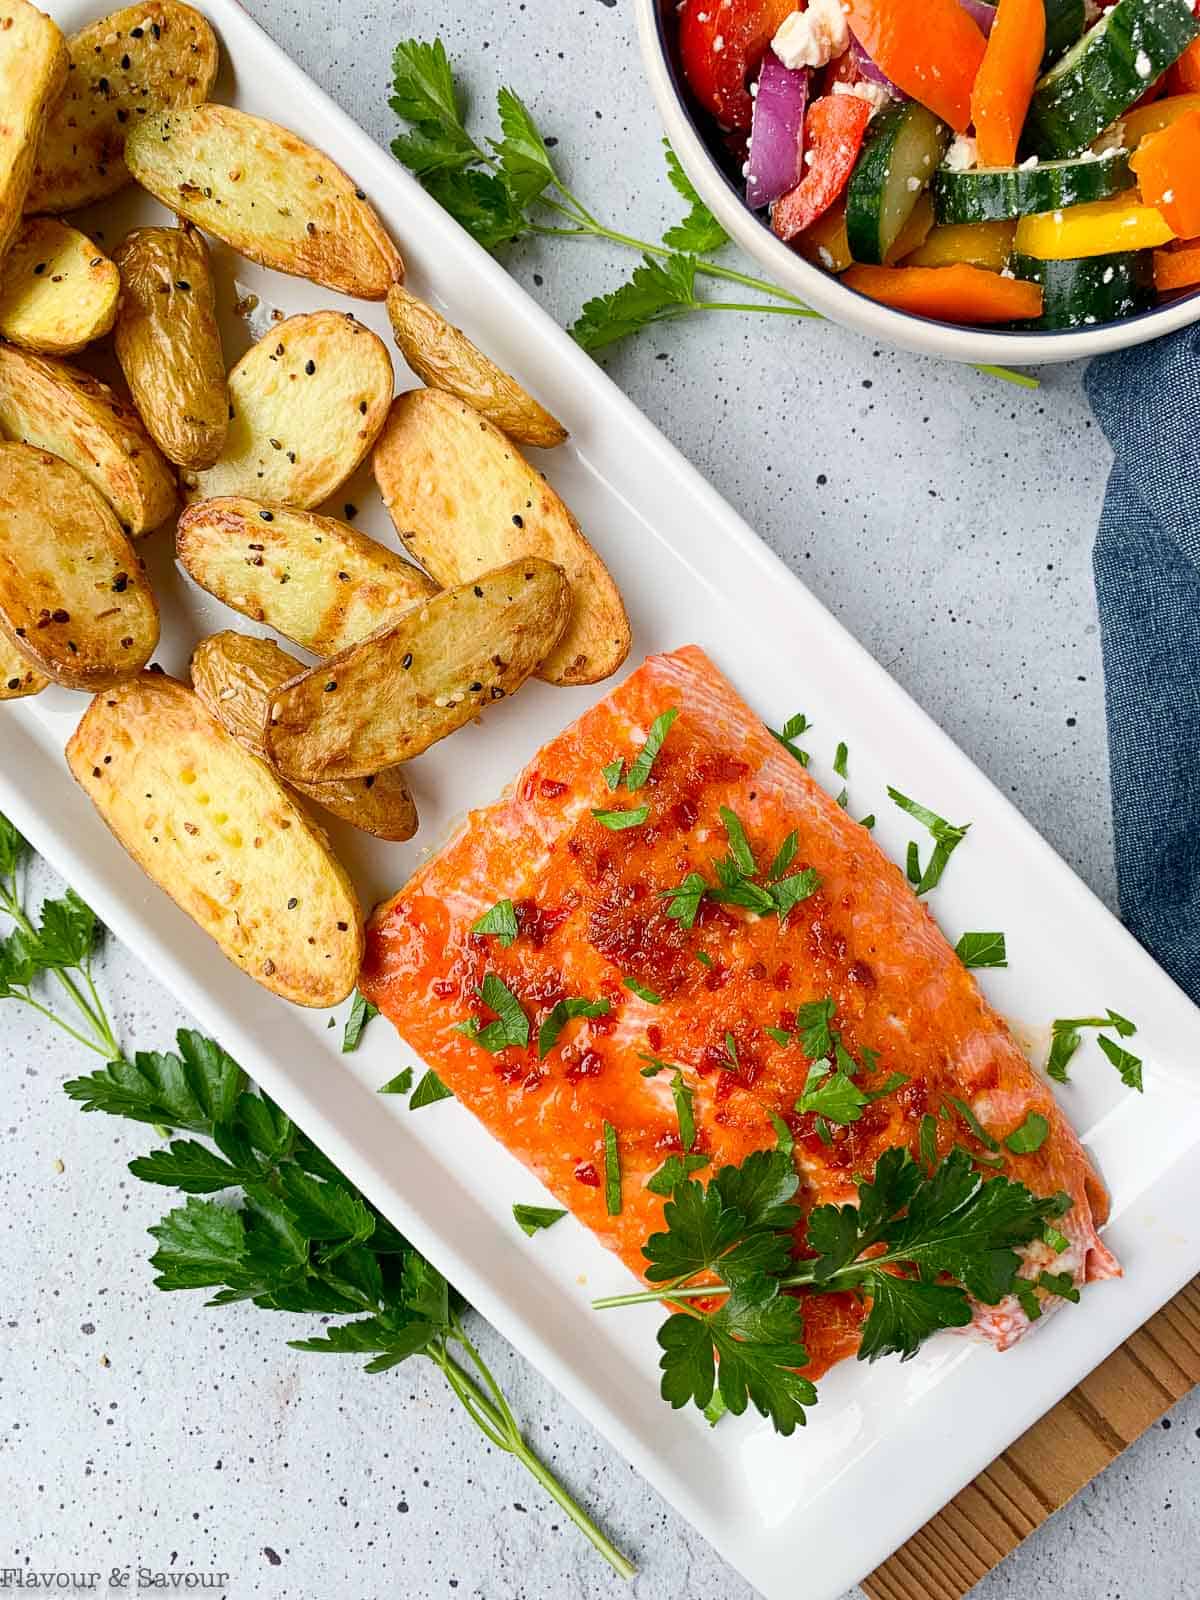 Overhead view of Citrus Chardonnay Glazed Wild Salmon on a platter with fingerling potatoes.